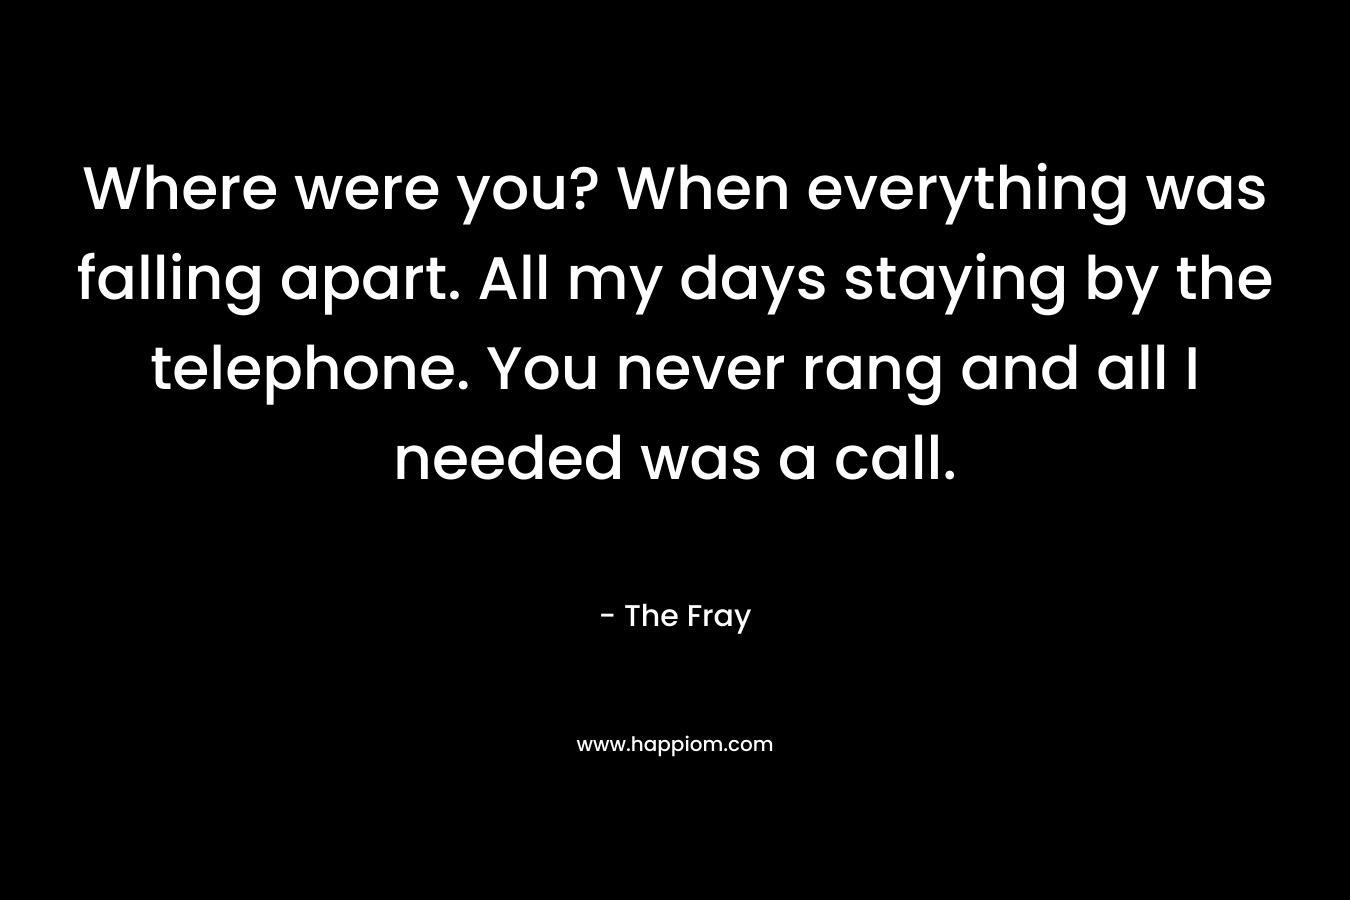 Where were you? When everything was falling apart. All my days staying by the telephone. You never rang and all I needed was a call.